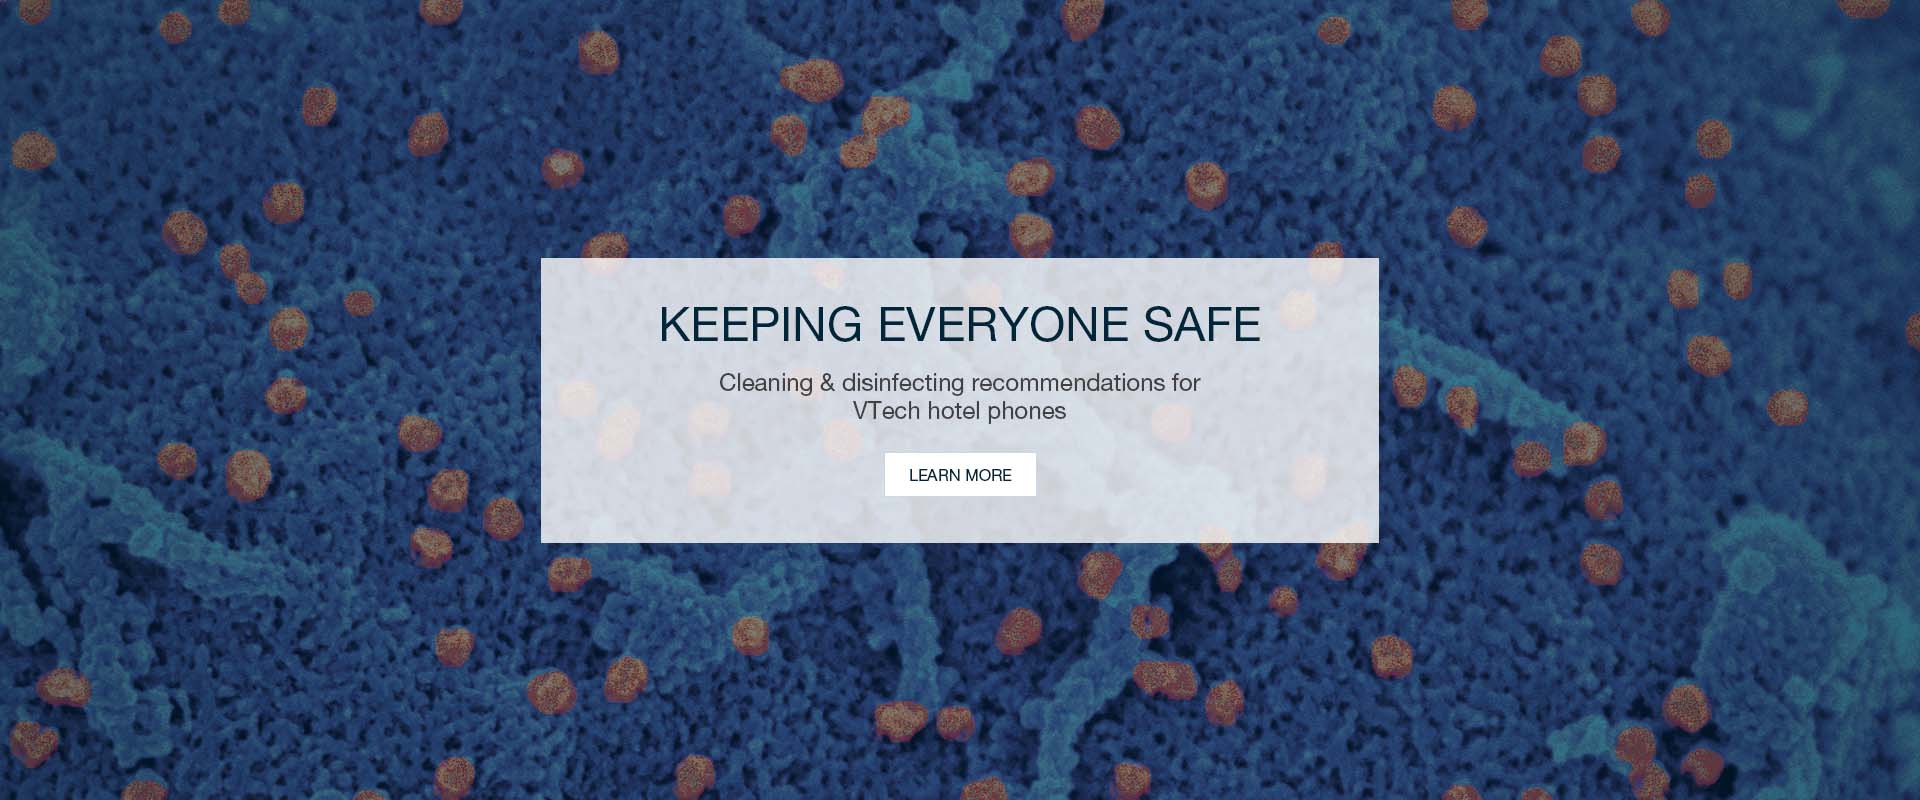 KEEPING EVERYONE SAFE Cleaning & disinfecting recommendations for VTech hotel phones